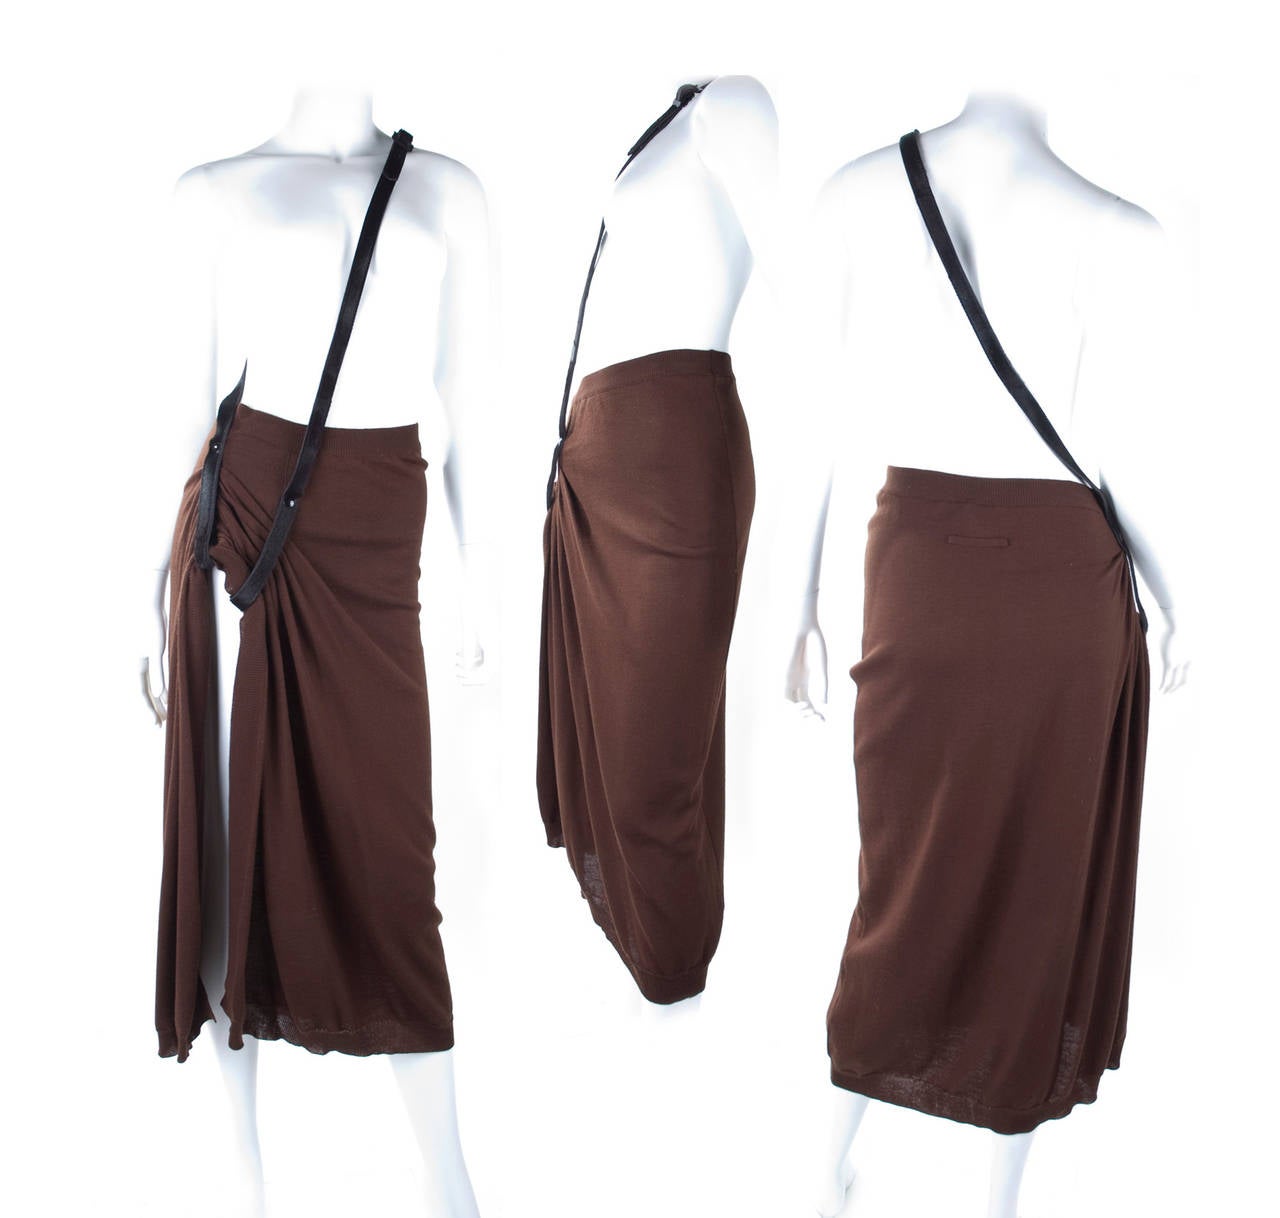 Jean Paul Gaultier Malle Knit Skirt with Leather Shoulder Strap.
Size : L
Material is virgin wool and strap calf-leather.
Measurement:
Length 86 cm -  34